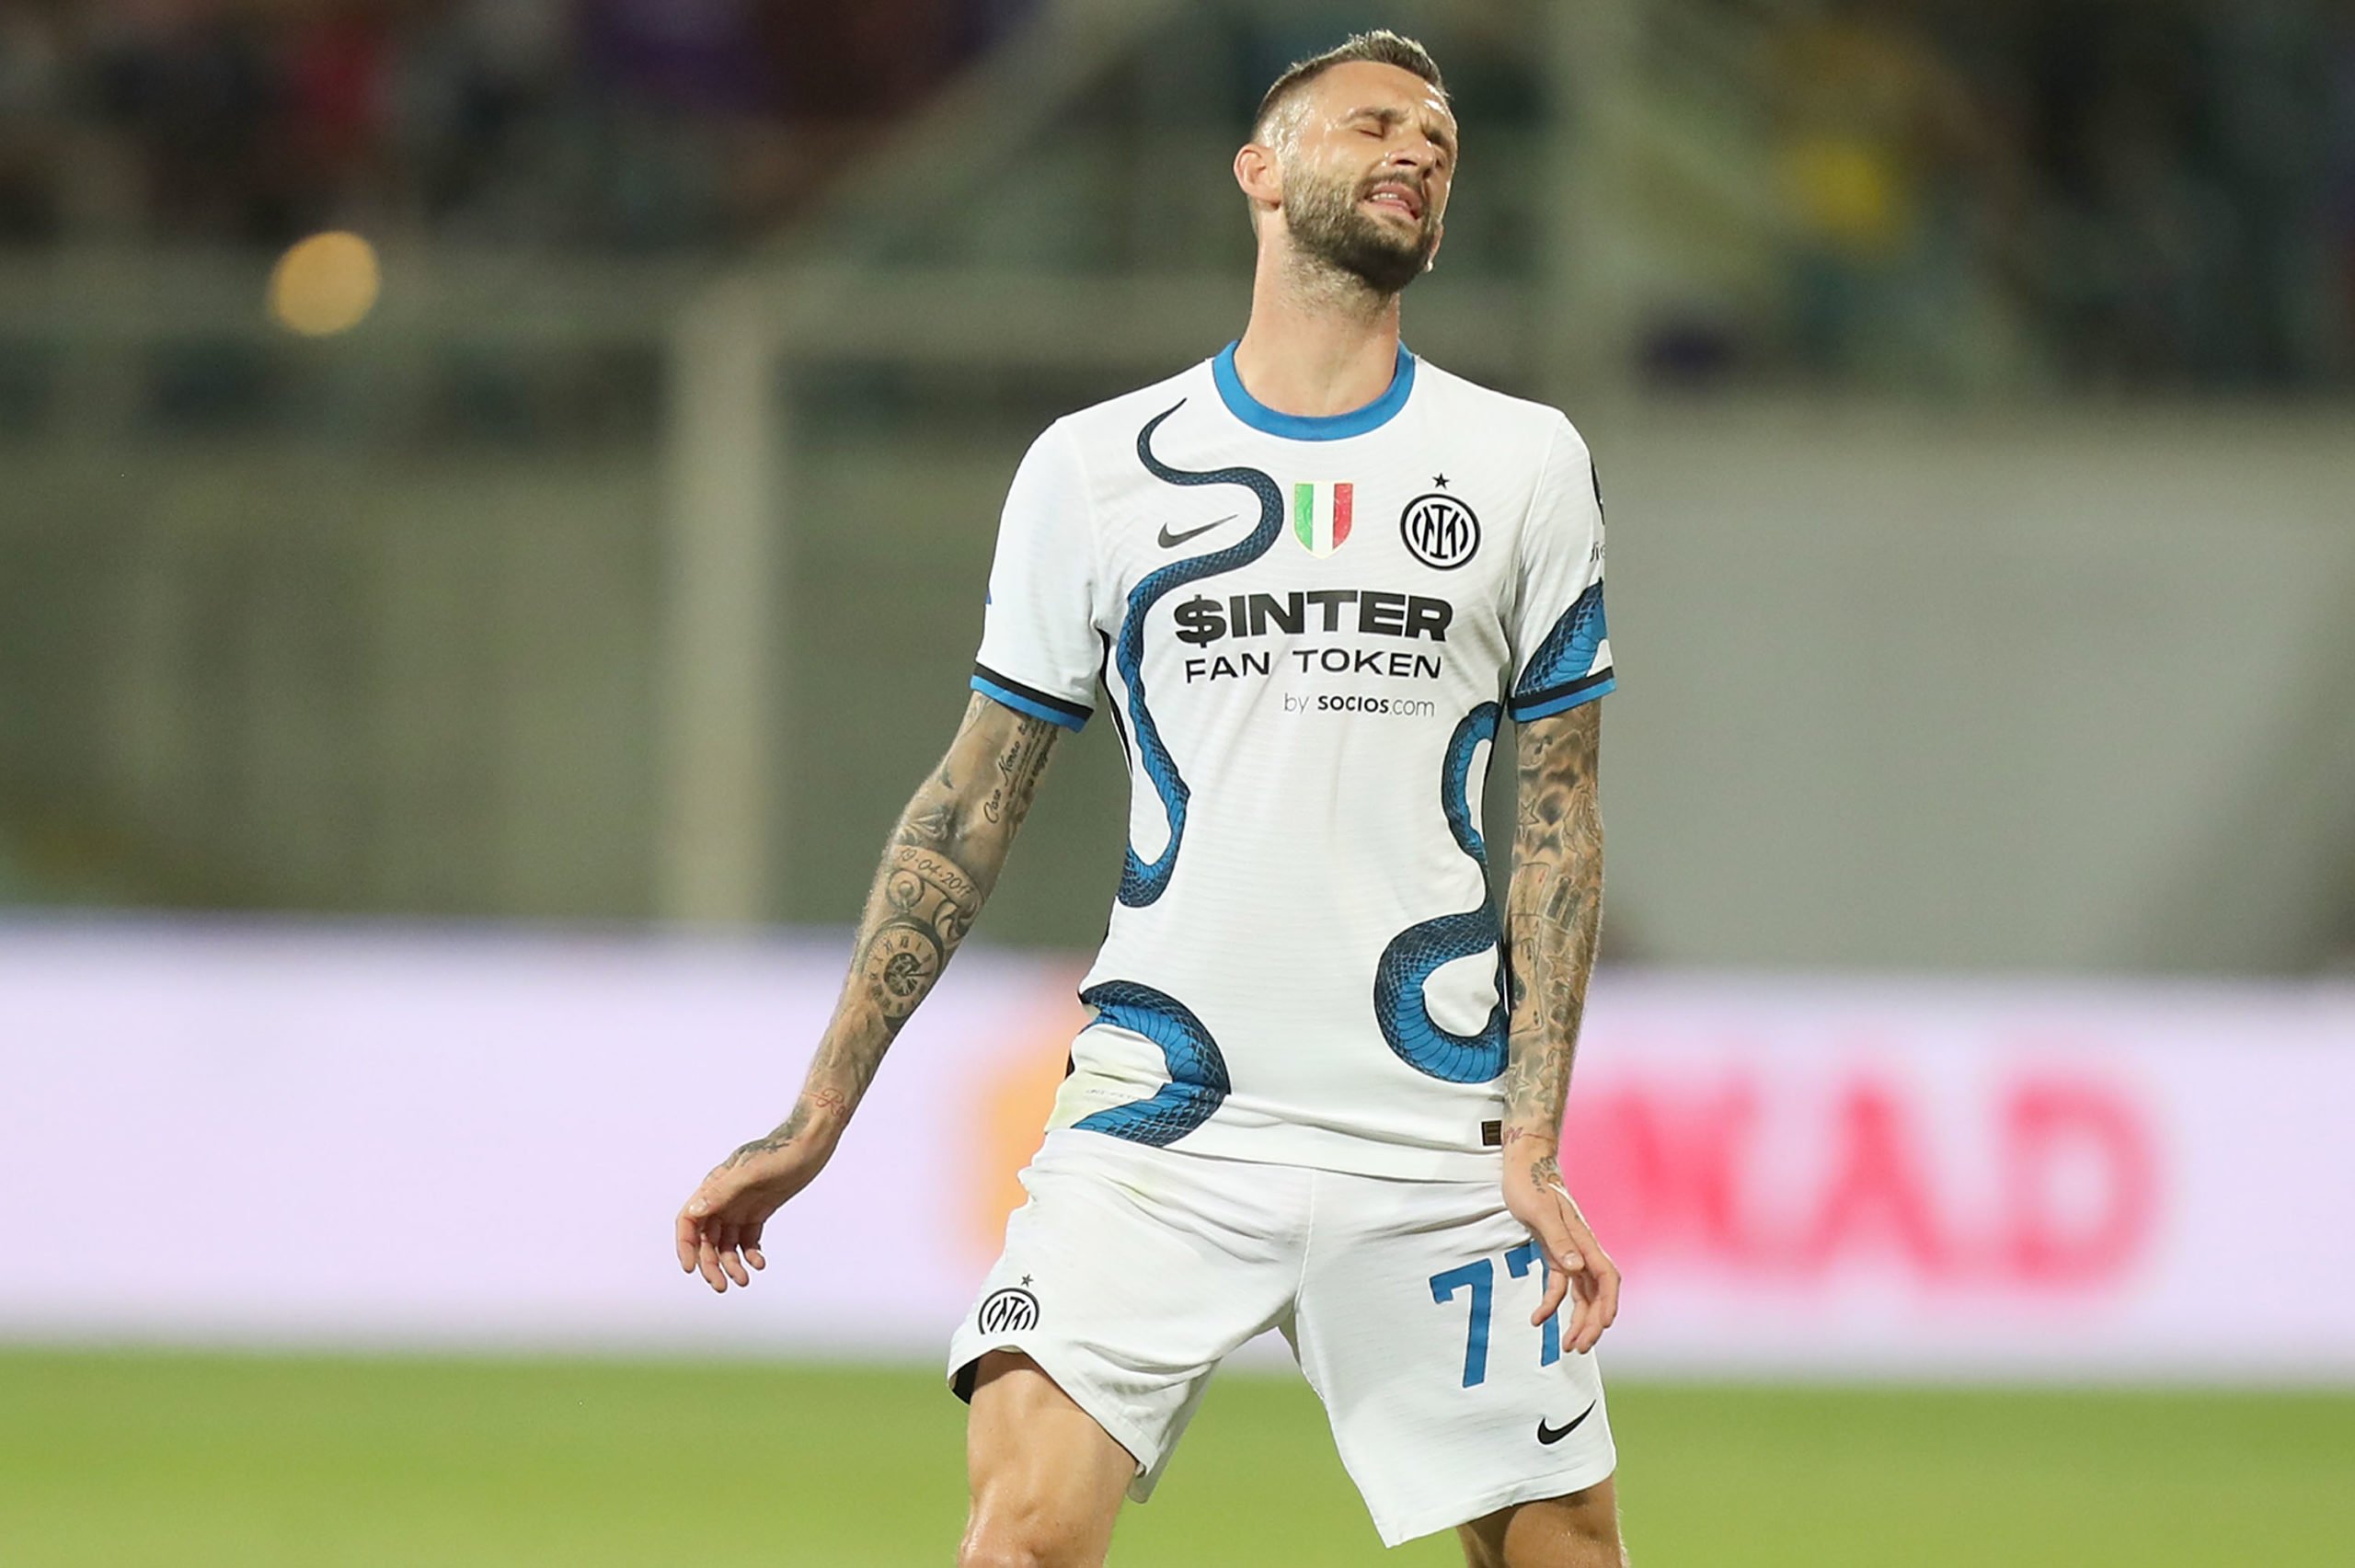 Man United locked in a three-way battle for Brozovic who is seen in the photo